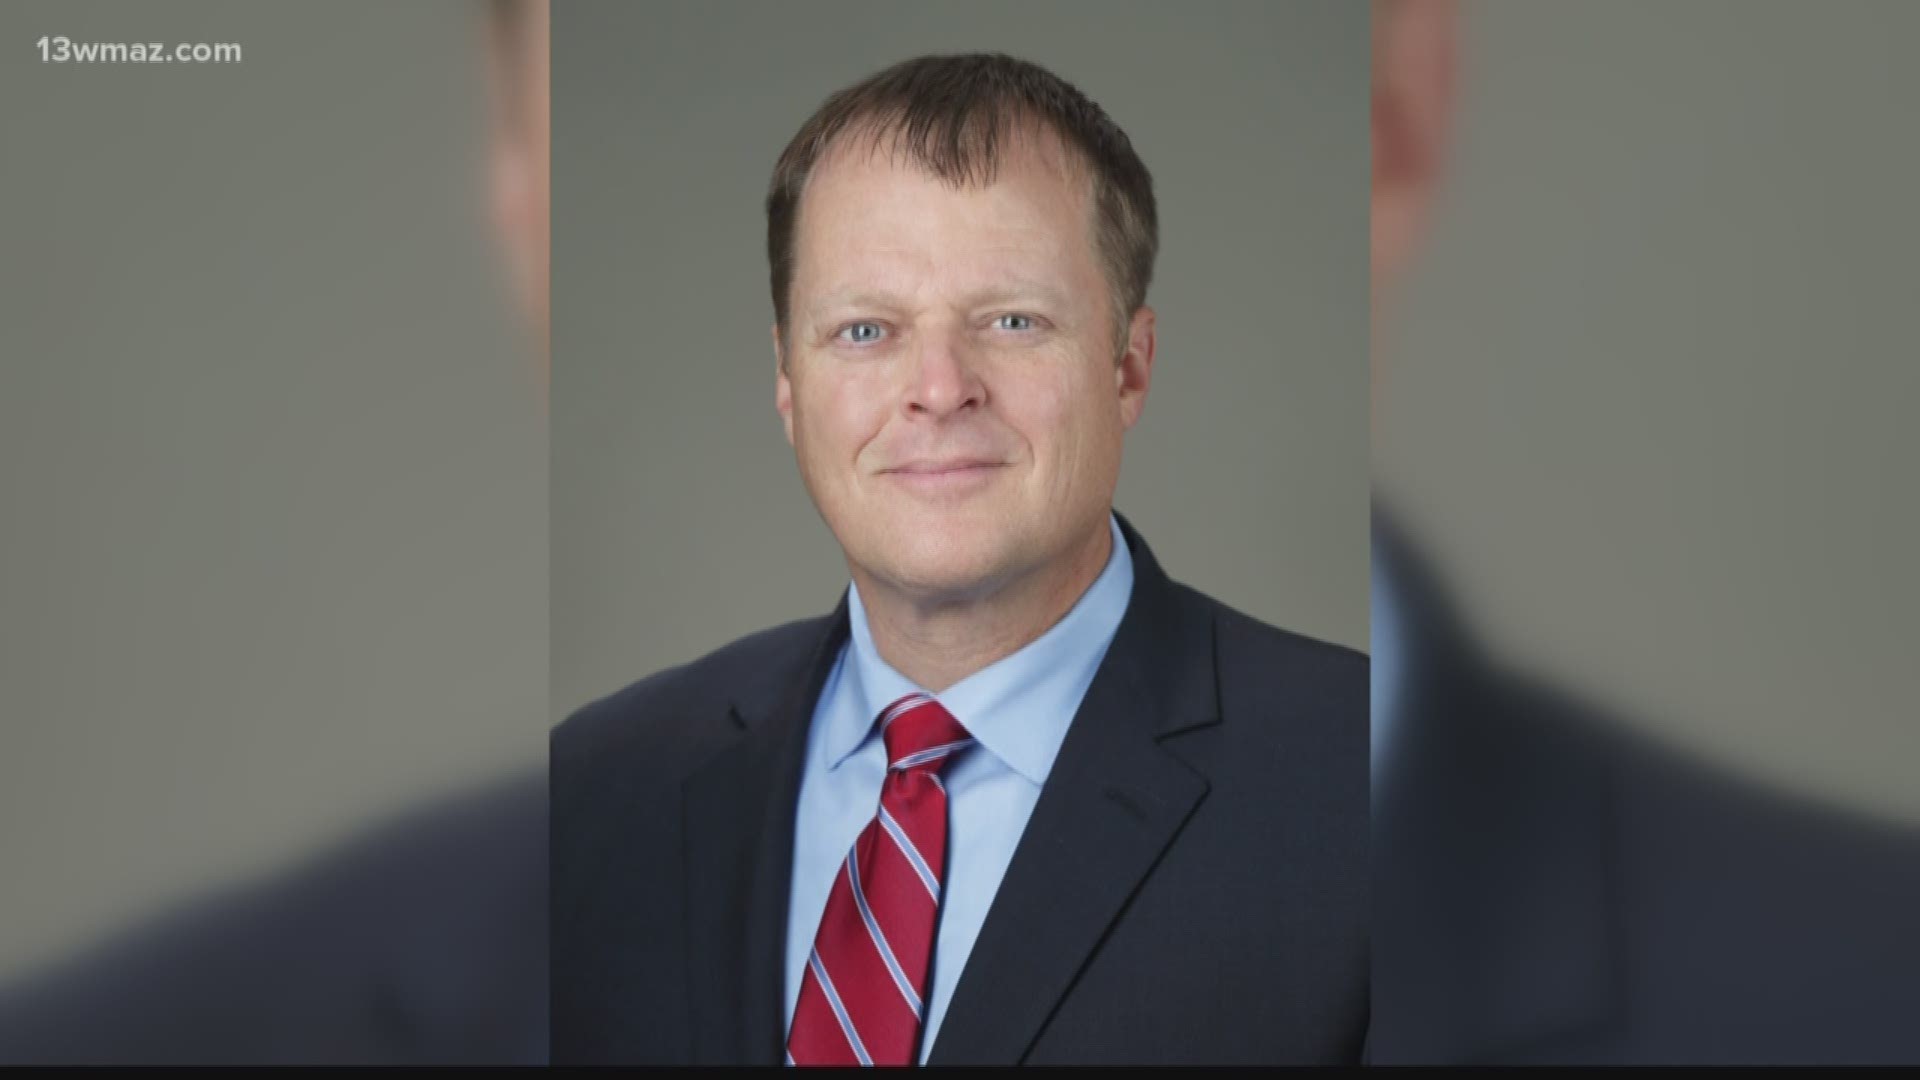 The Carl Vinson VA Medical Center in Dublin is introducing their new director, David Whitmer, at a Veterans Town Hall Tuesday at 10 a.m. According to the VA, he has a track record of improving hospitals that struggle with veterans issues.